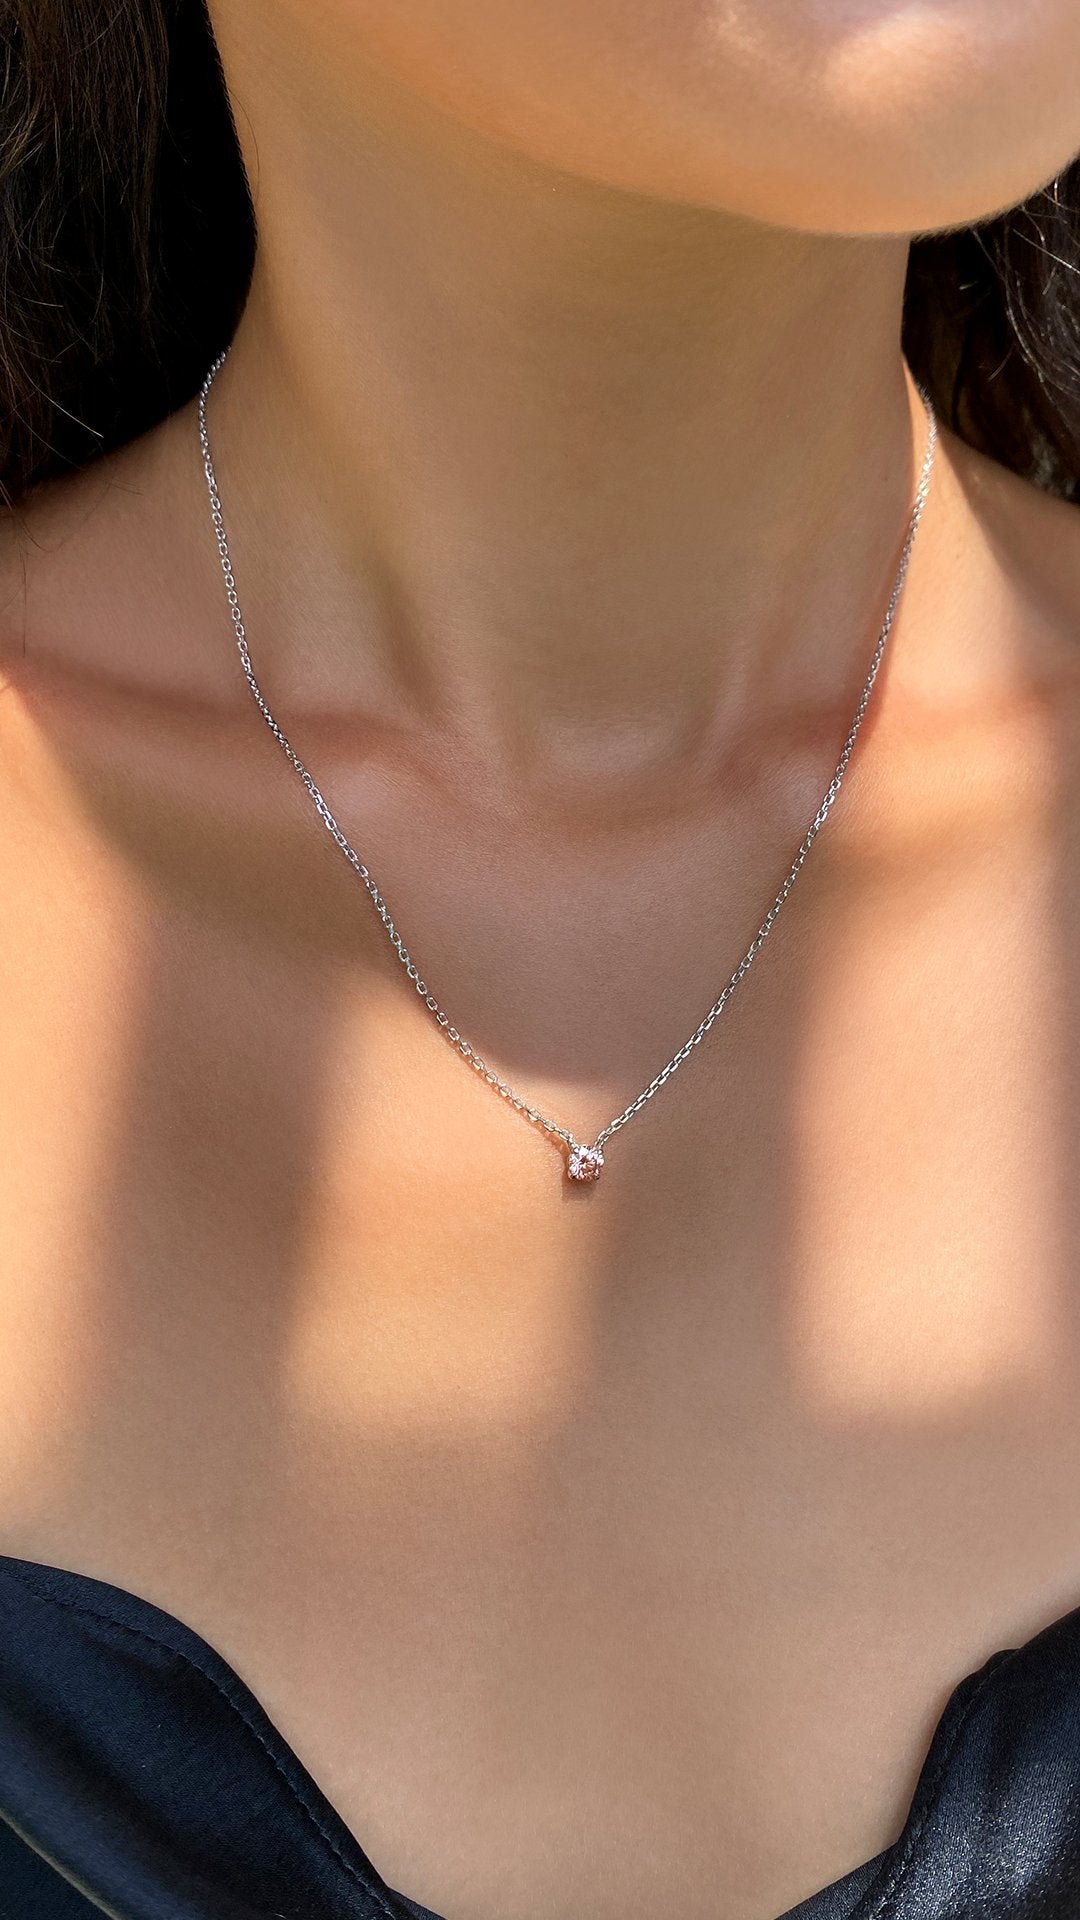 Taffy Necklace 0.31ct 18K White Gold